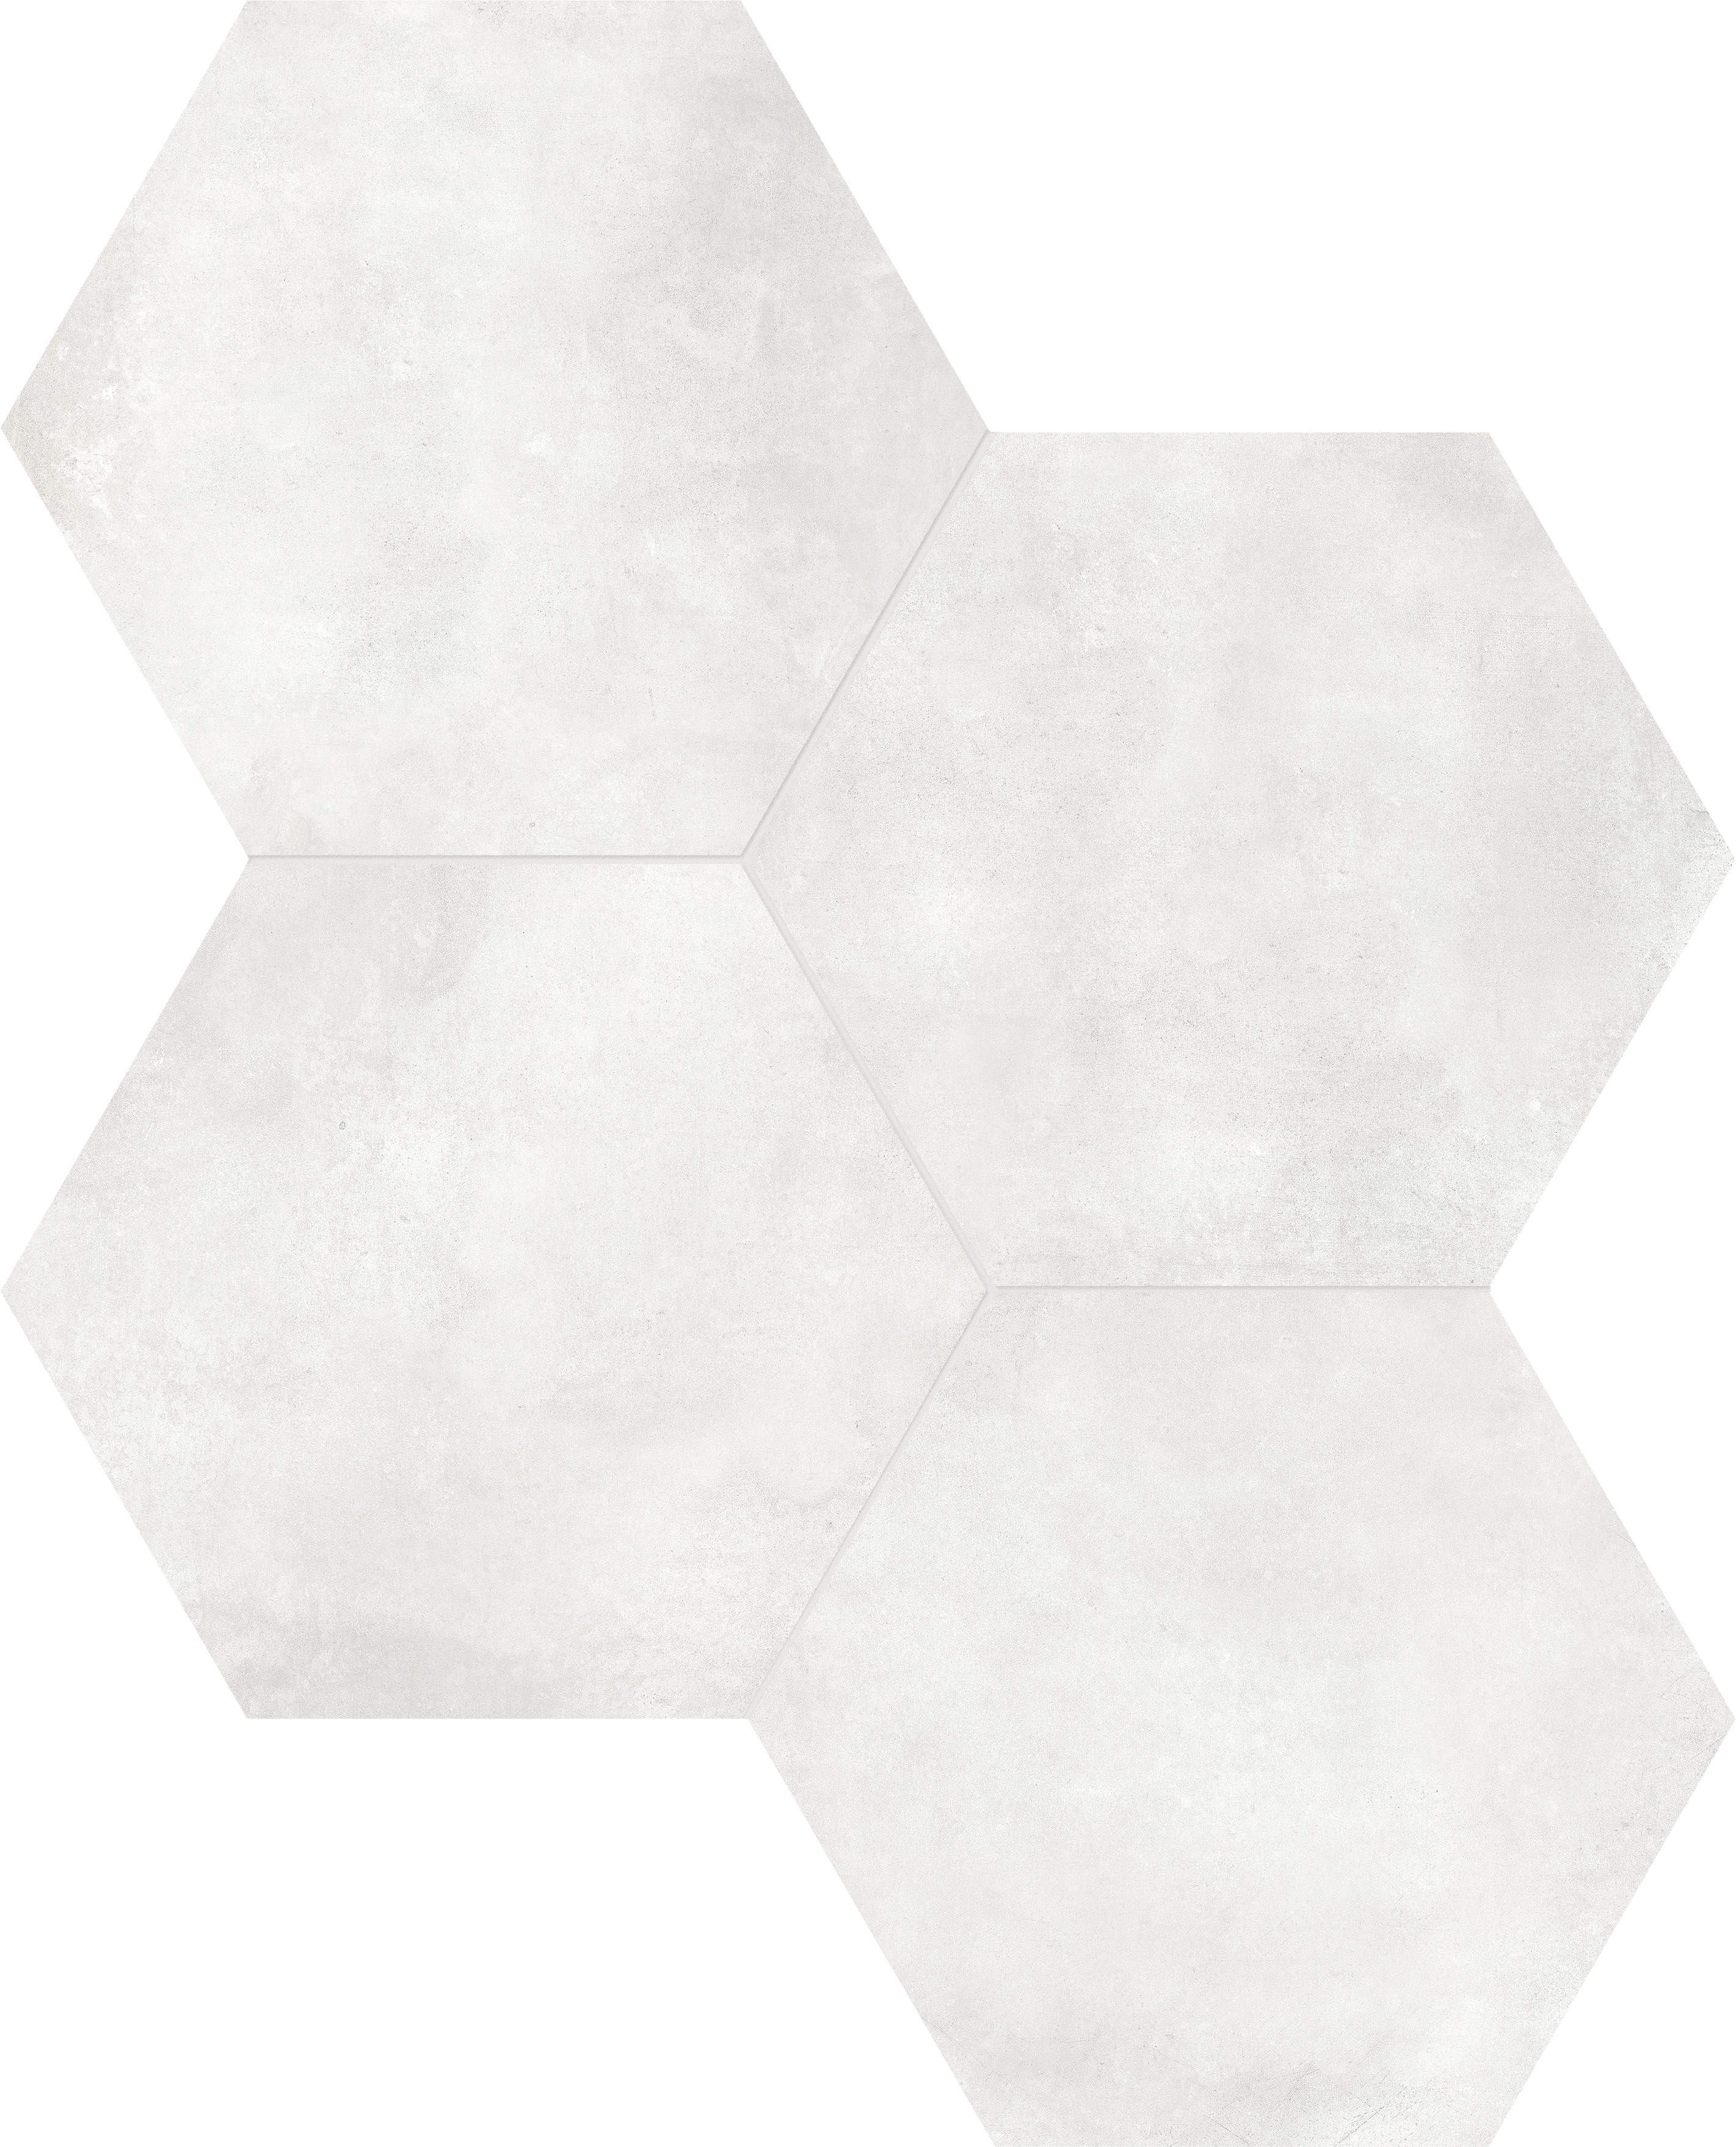 ivory pattern glazed porcelain field tile from form anatolia collection distributed by surface group international matte finish pressed edge 7-inch hexagon shape